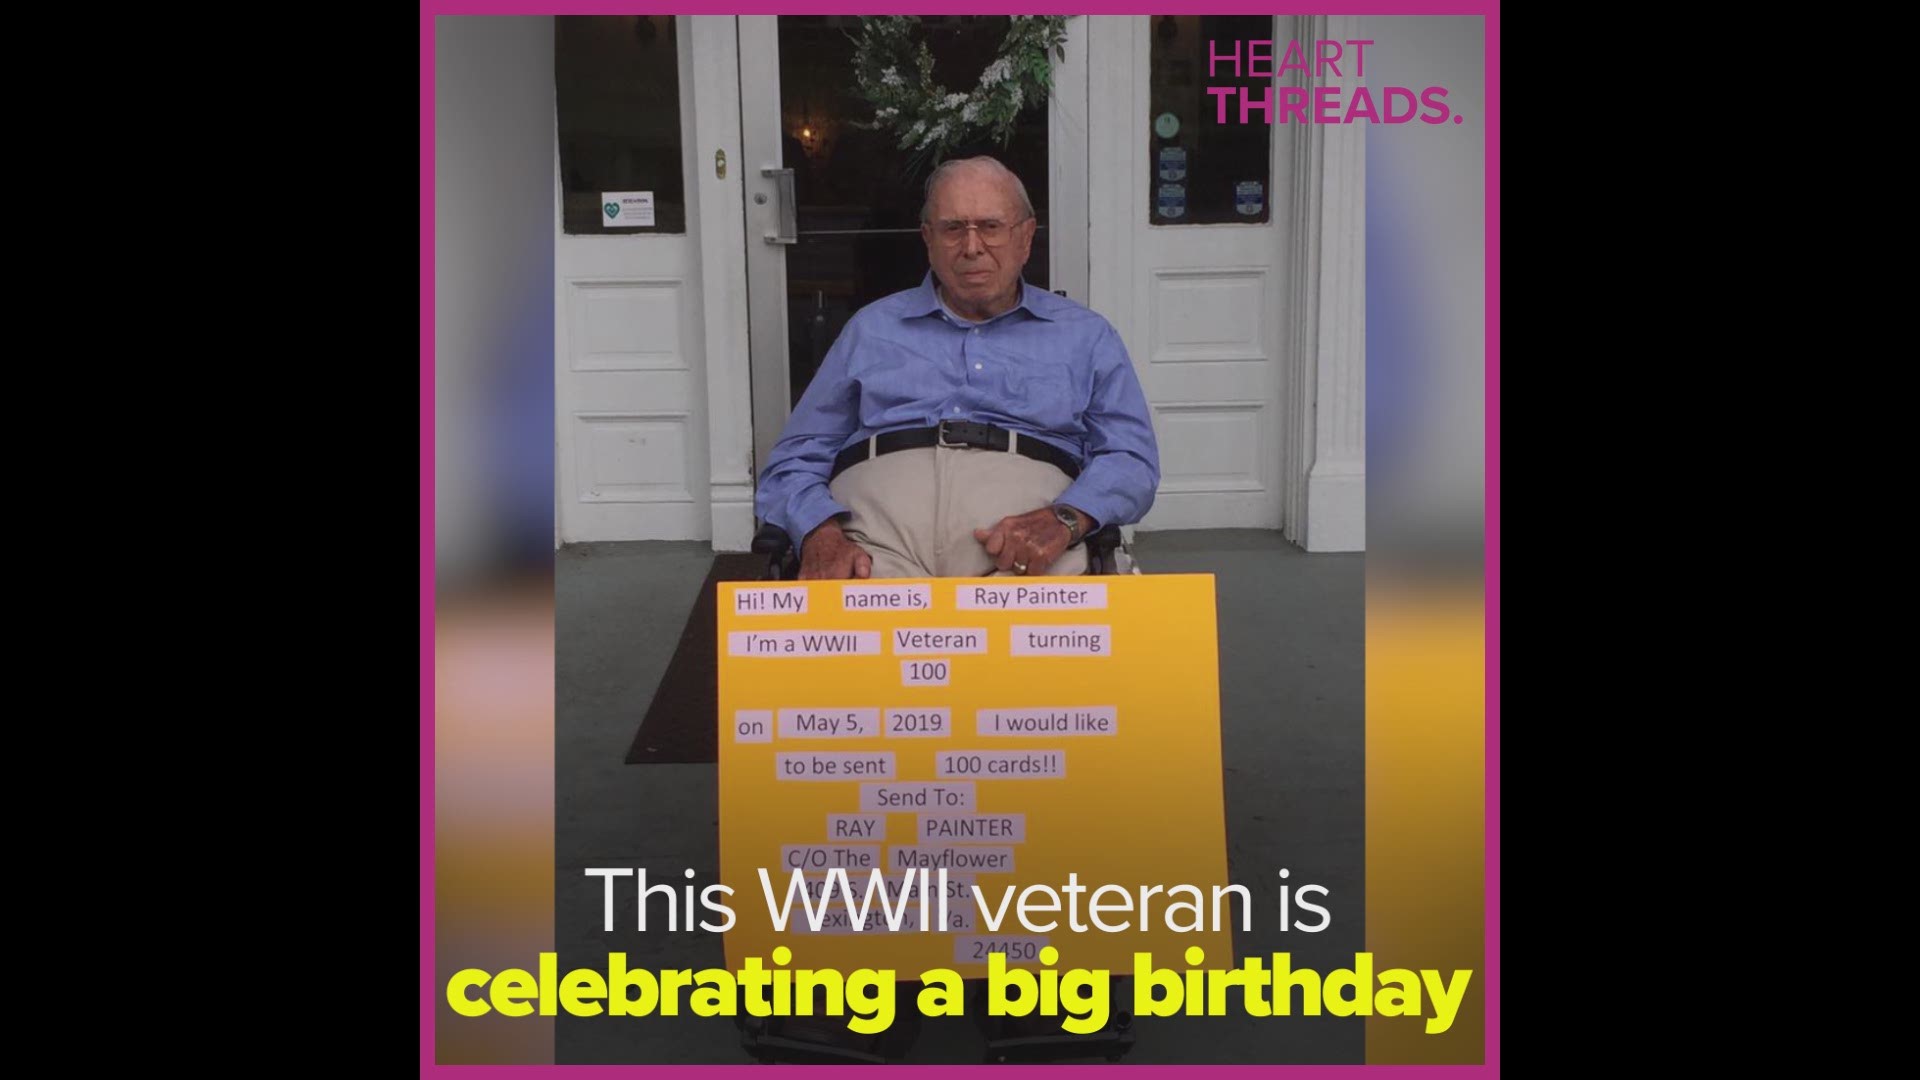 This WWII veteran is hoping people will send him cards to help him celebrate his birthday.